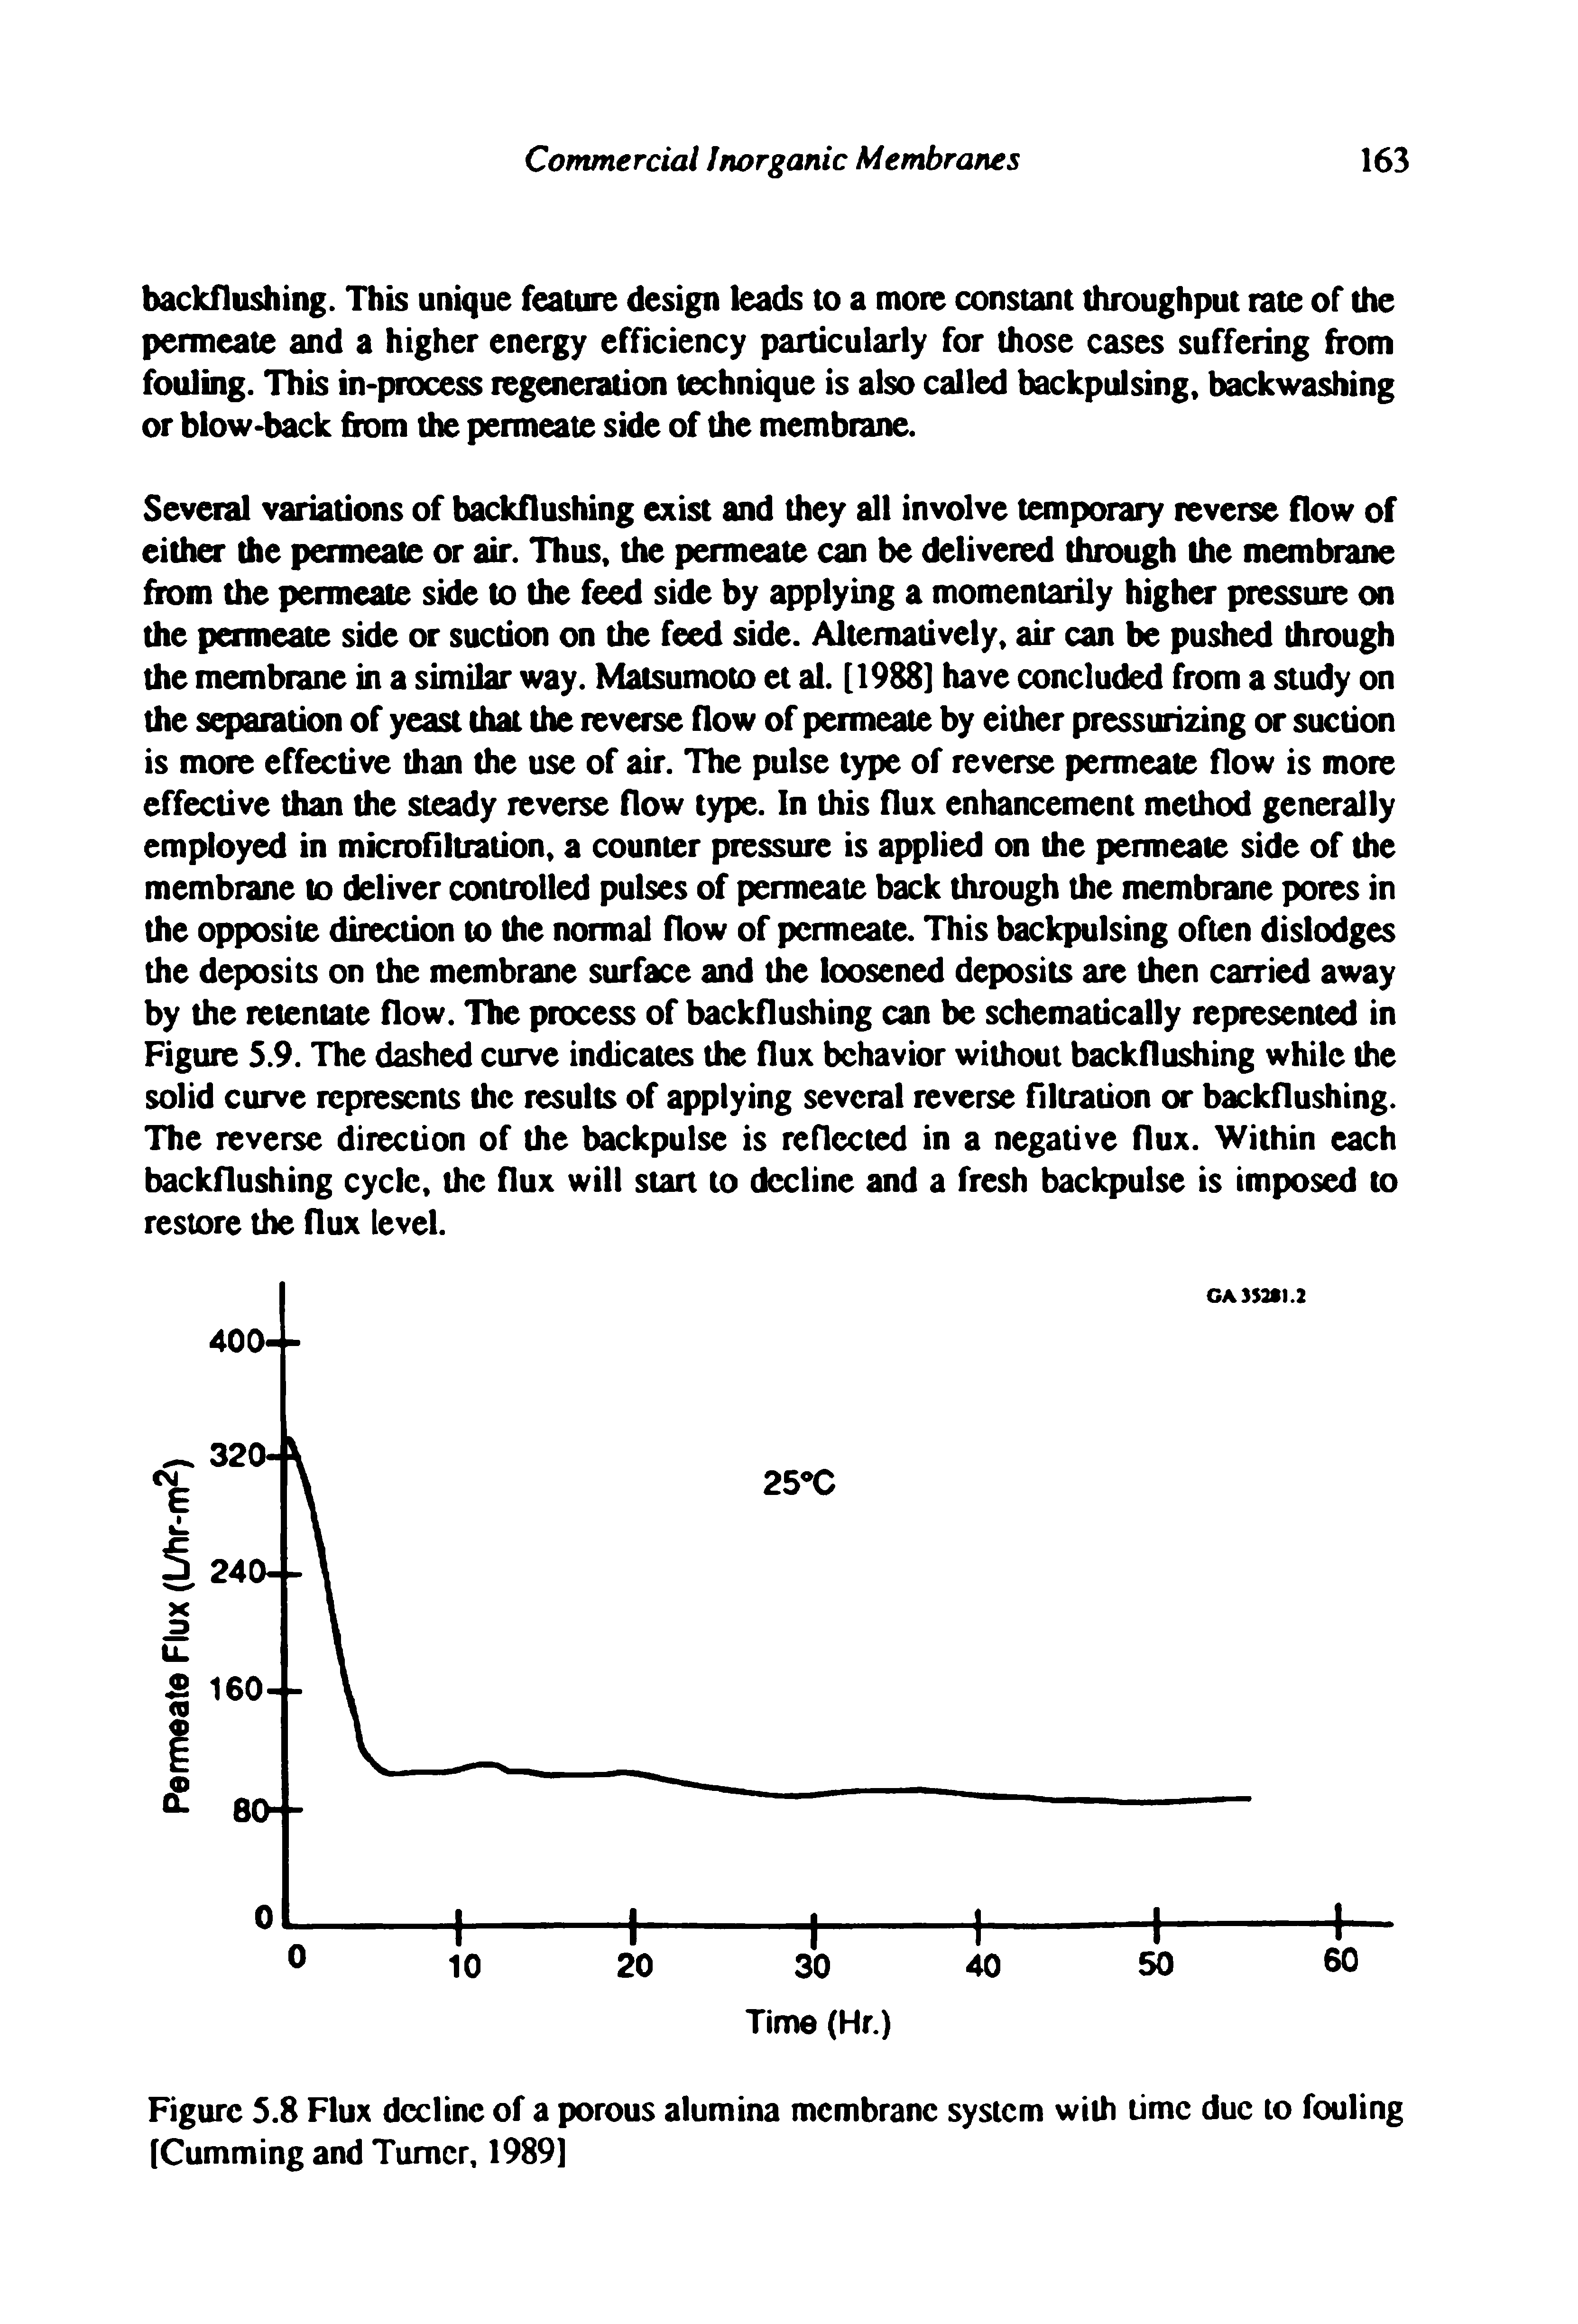 Figure 5.8 Flux decline of a porous alumina membrane system with Lime due to fouling [Gumming and Turner, 1989]...